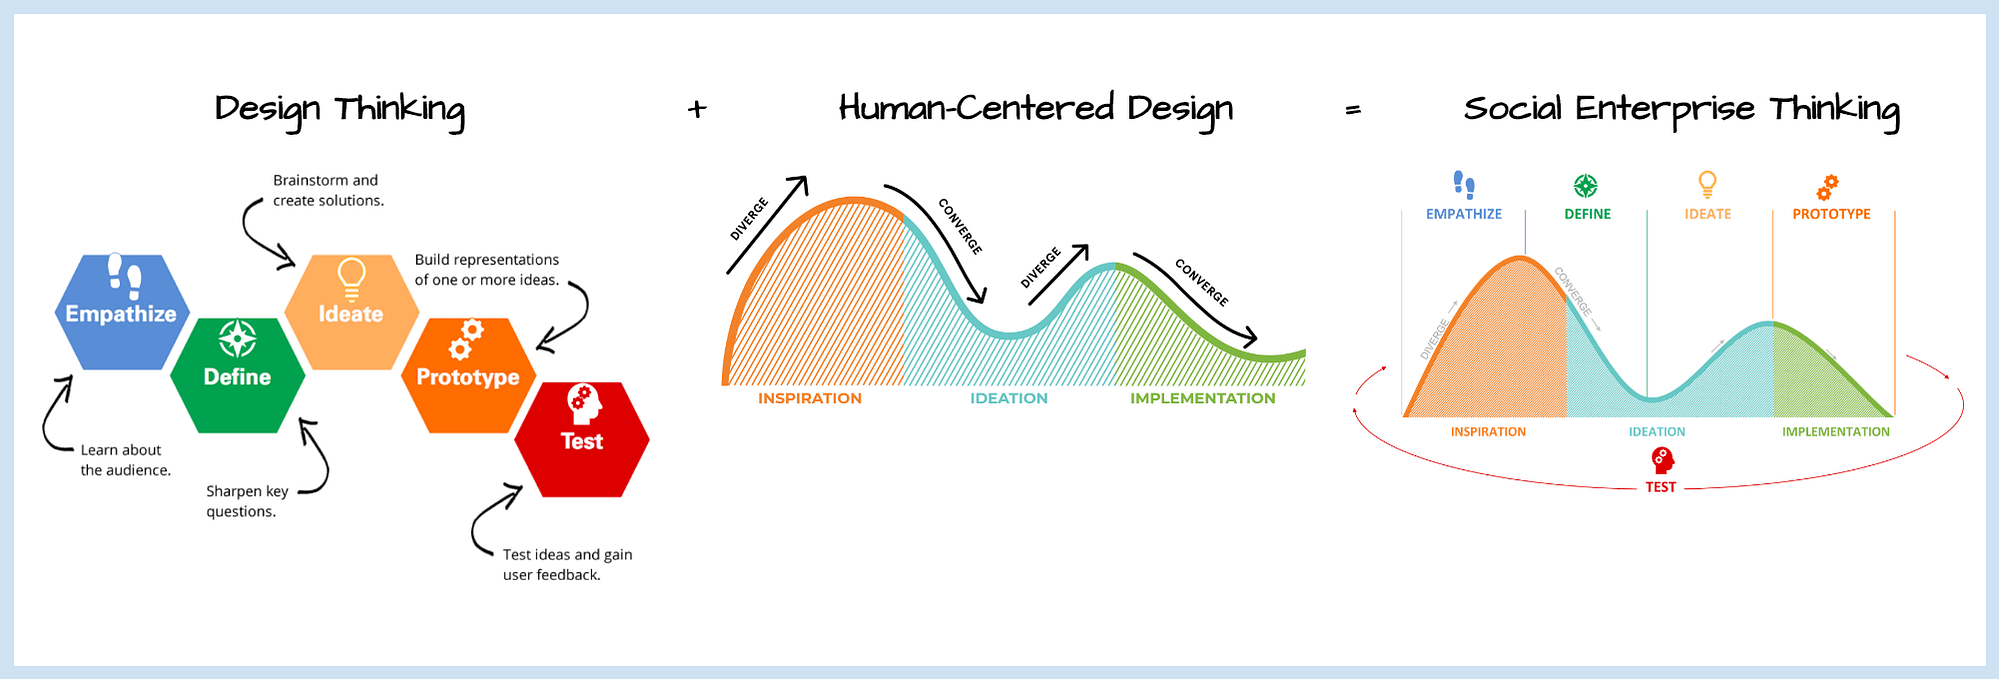 Using Design Thinking and Human Centered Design together